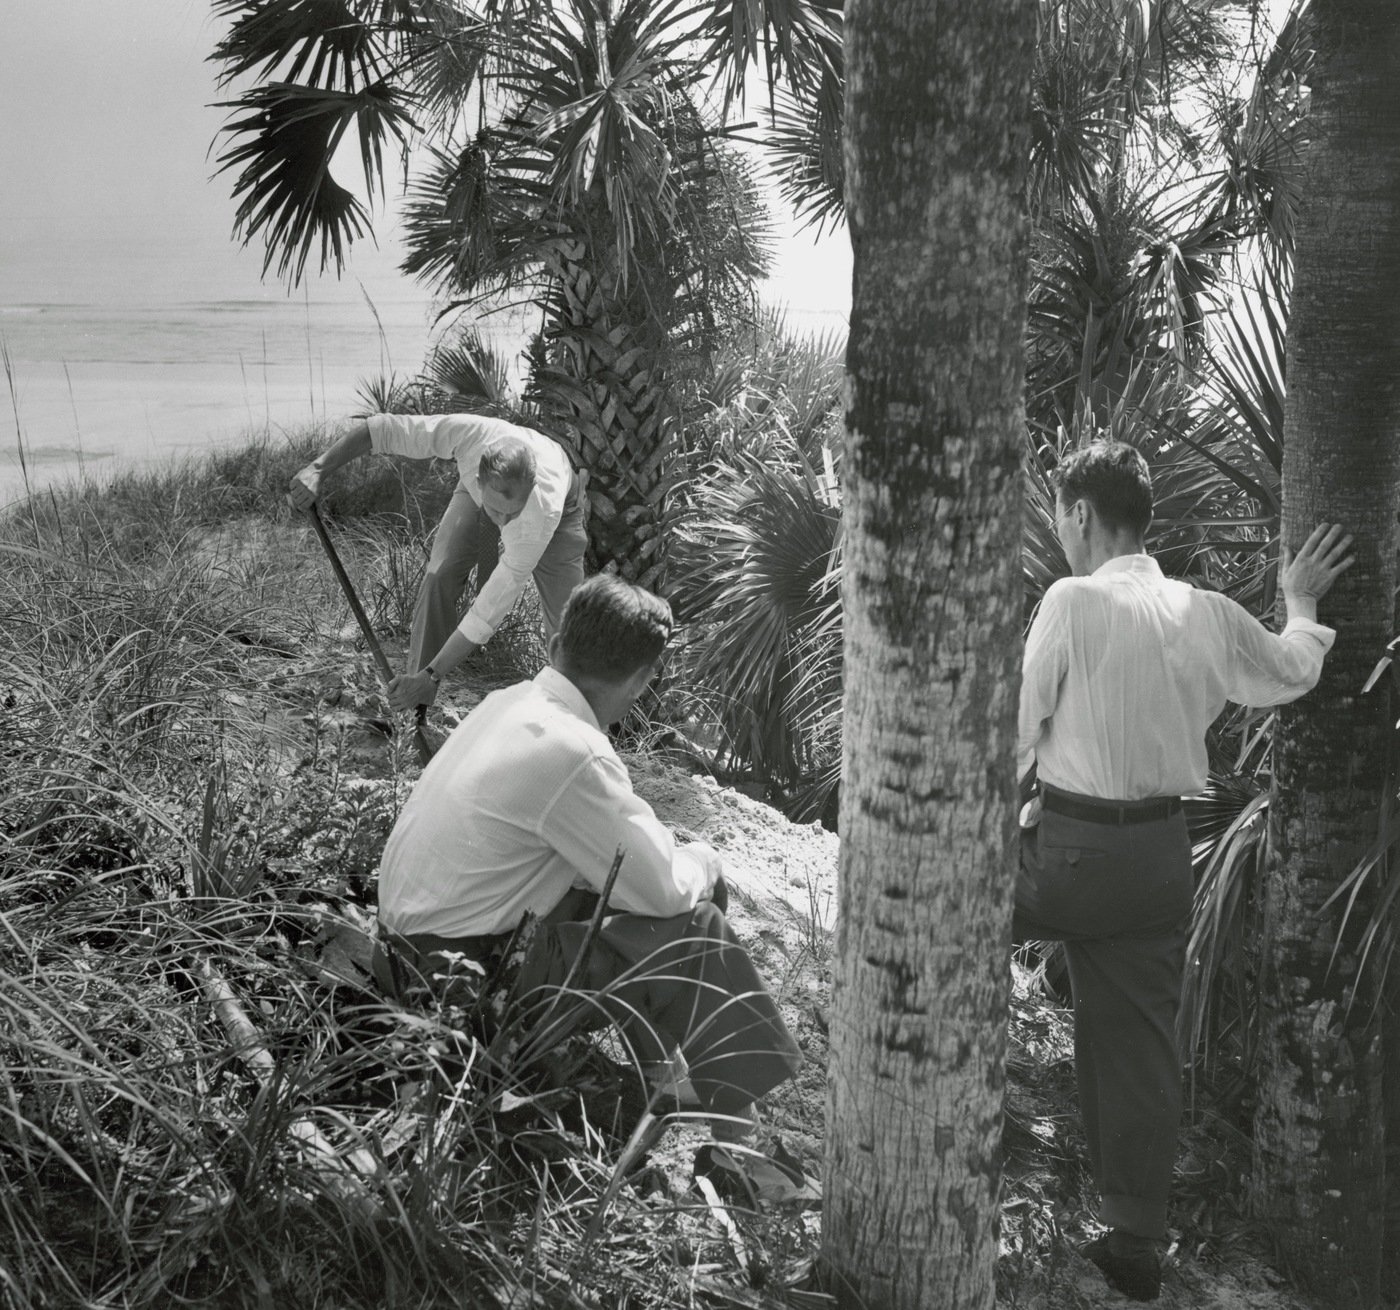 A special agent digs at spot in Ponte Vedra, Florida, where Nazi saboteur Kerling identified spot where his team had buried their sabotage equipment and uniforms in 1942. Kerling and another special agent look on.